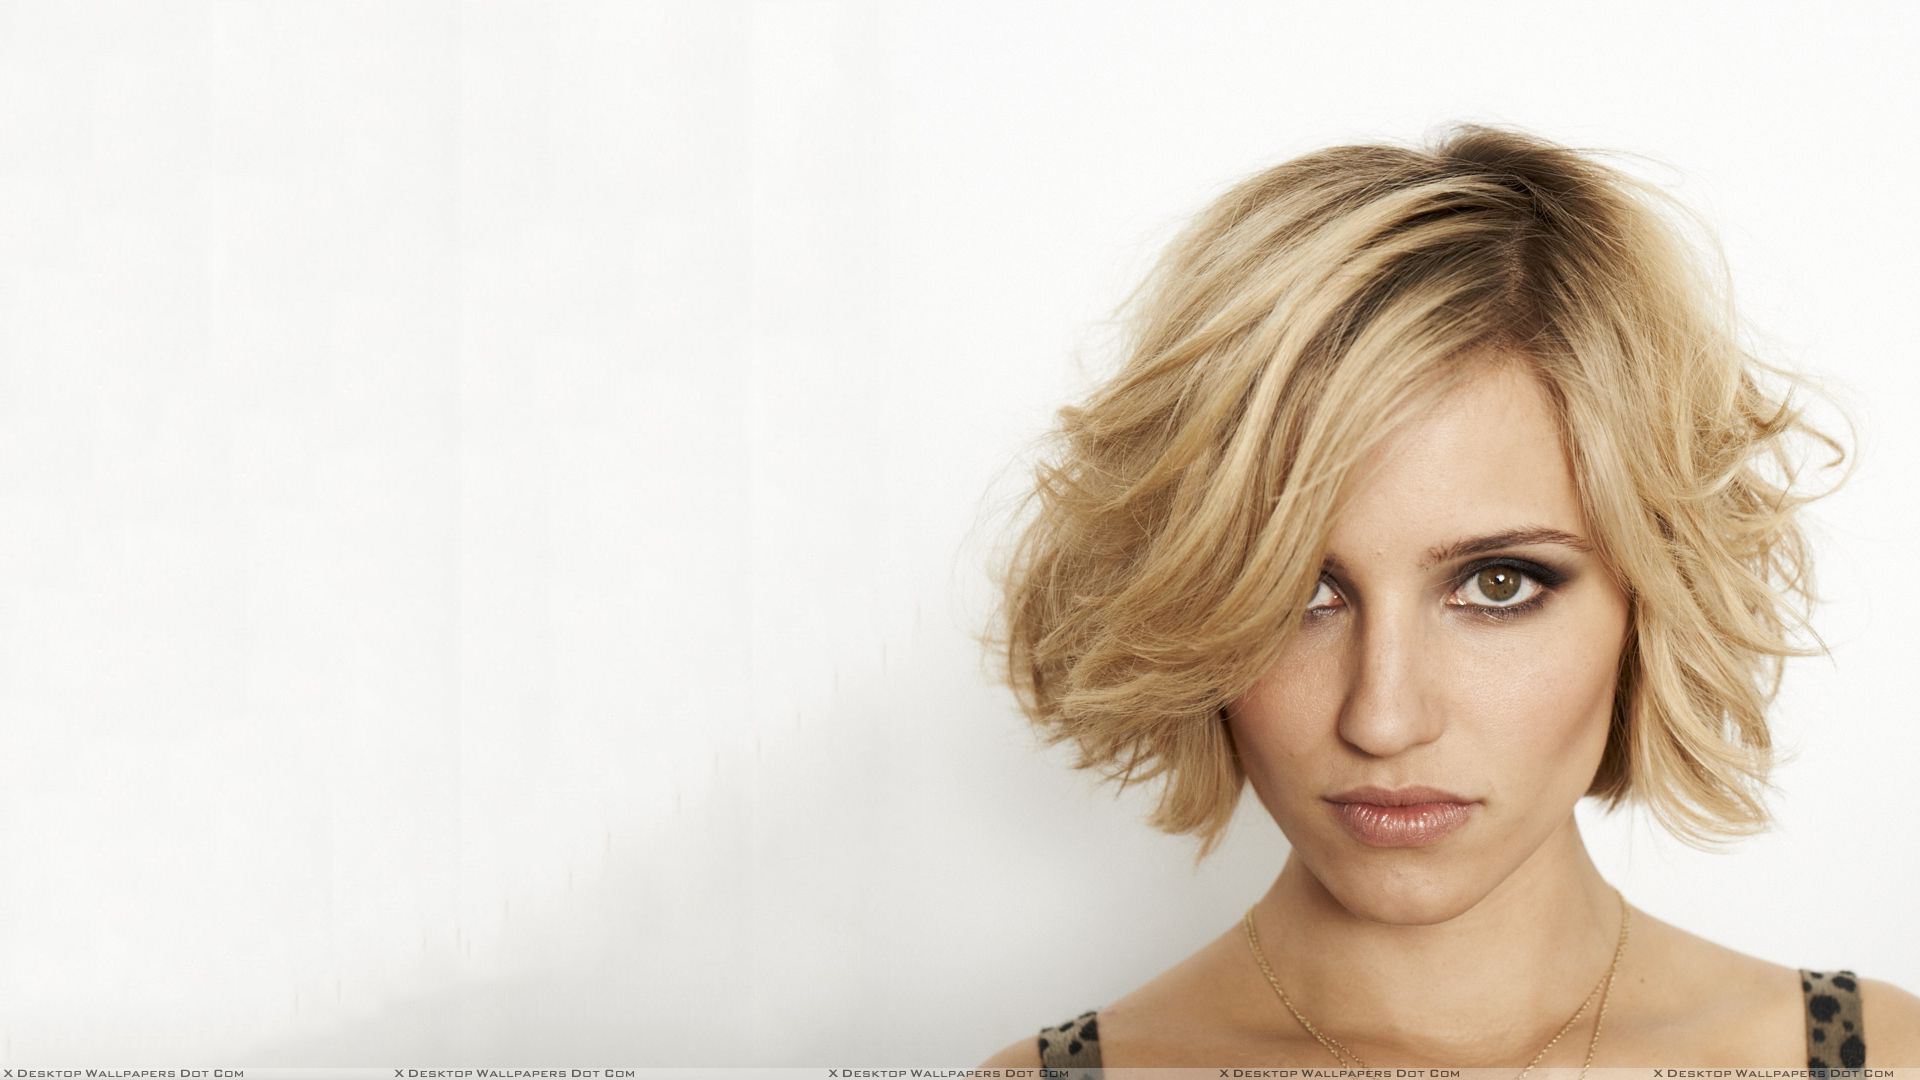 Dianna Agron Wallpapers, Photos & Images in HD